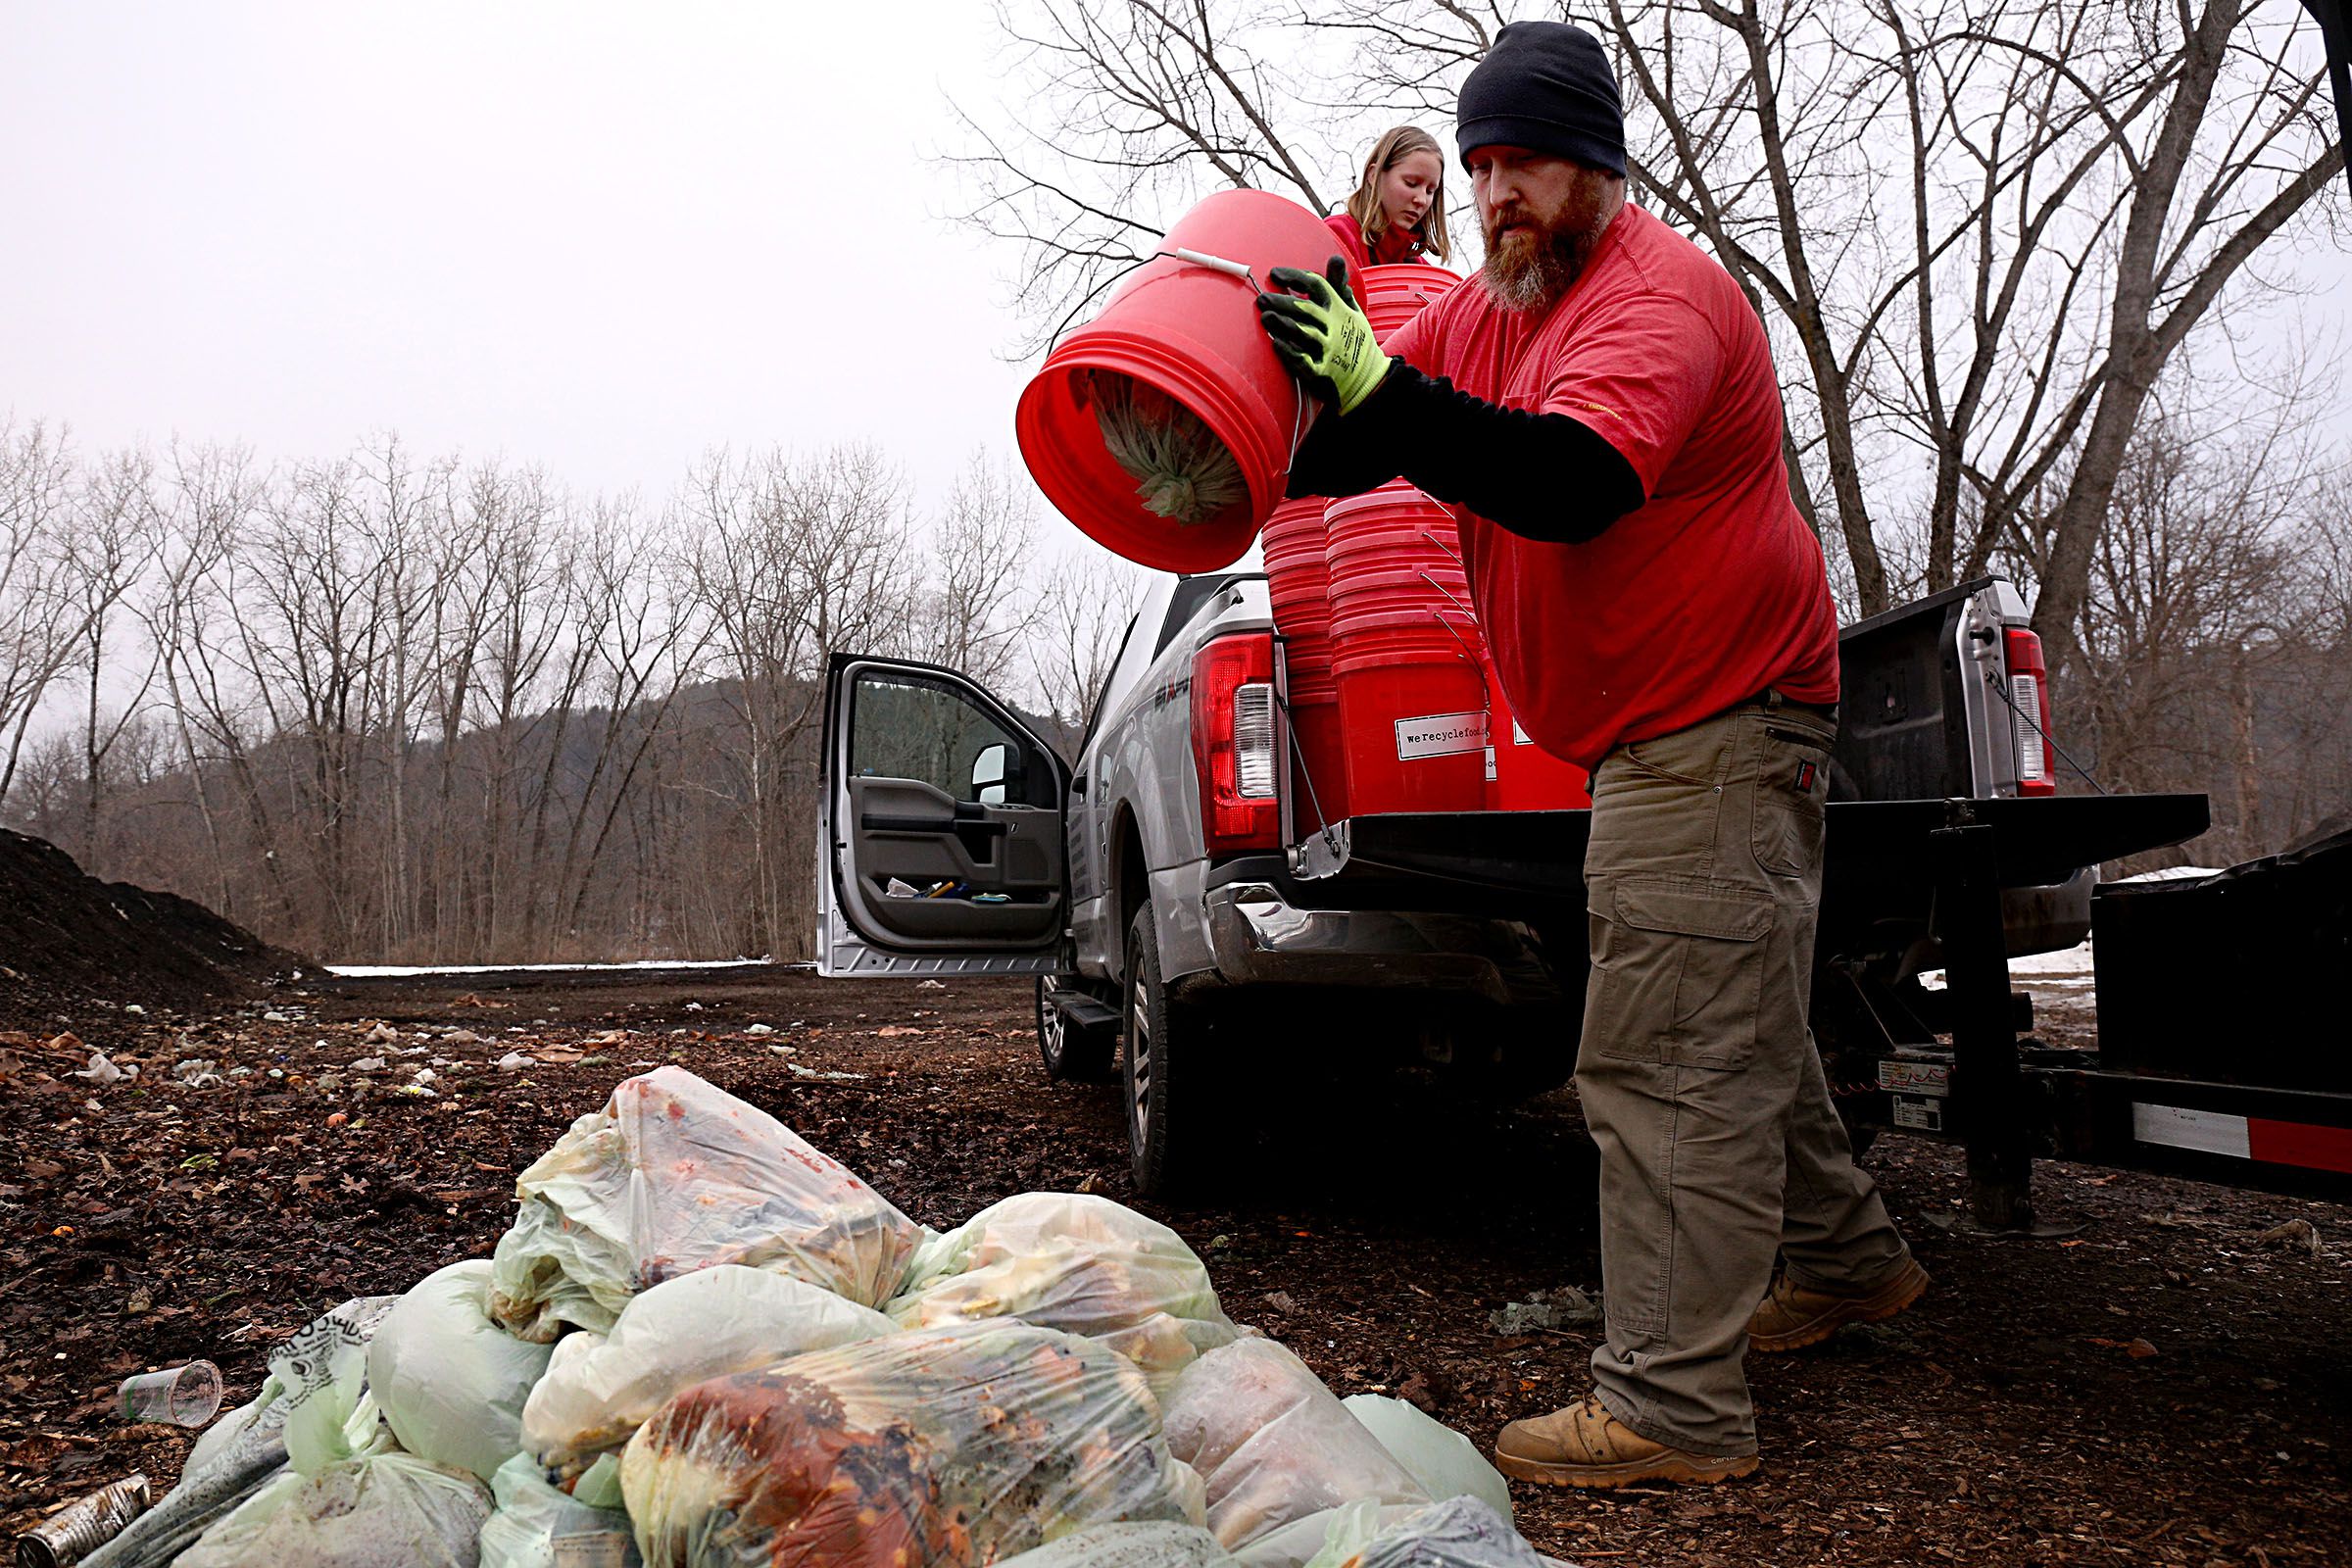 Joshua Dickey, who is General Manager for Nordic Waste Services in Lebanon, N.H., drops a load of compost with his daughter Lydia's help at the landfill in West Lebanon on Jan. 14, 2021. The company's We Recycle Food program offers weekly curbside, drop-off and commercial services for composting. (Valley News - Geoff Hansen) Copyright Valley News. May not be reprinted or used online without permission. Send requests to permission@vnews.com.